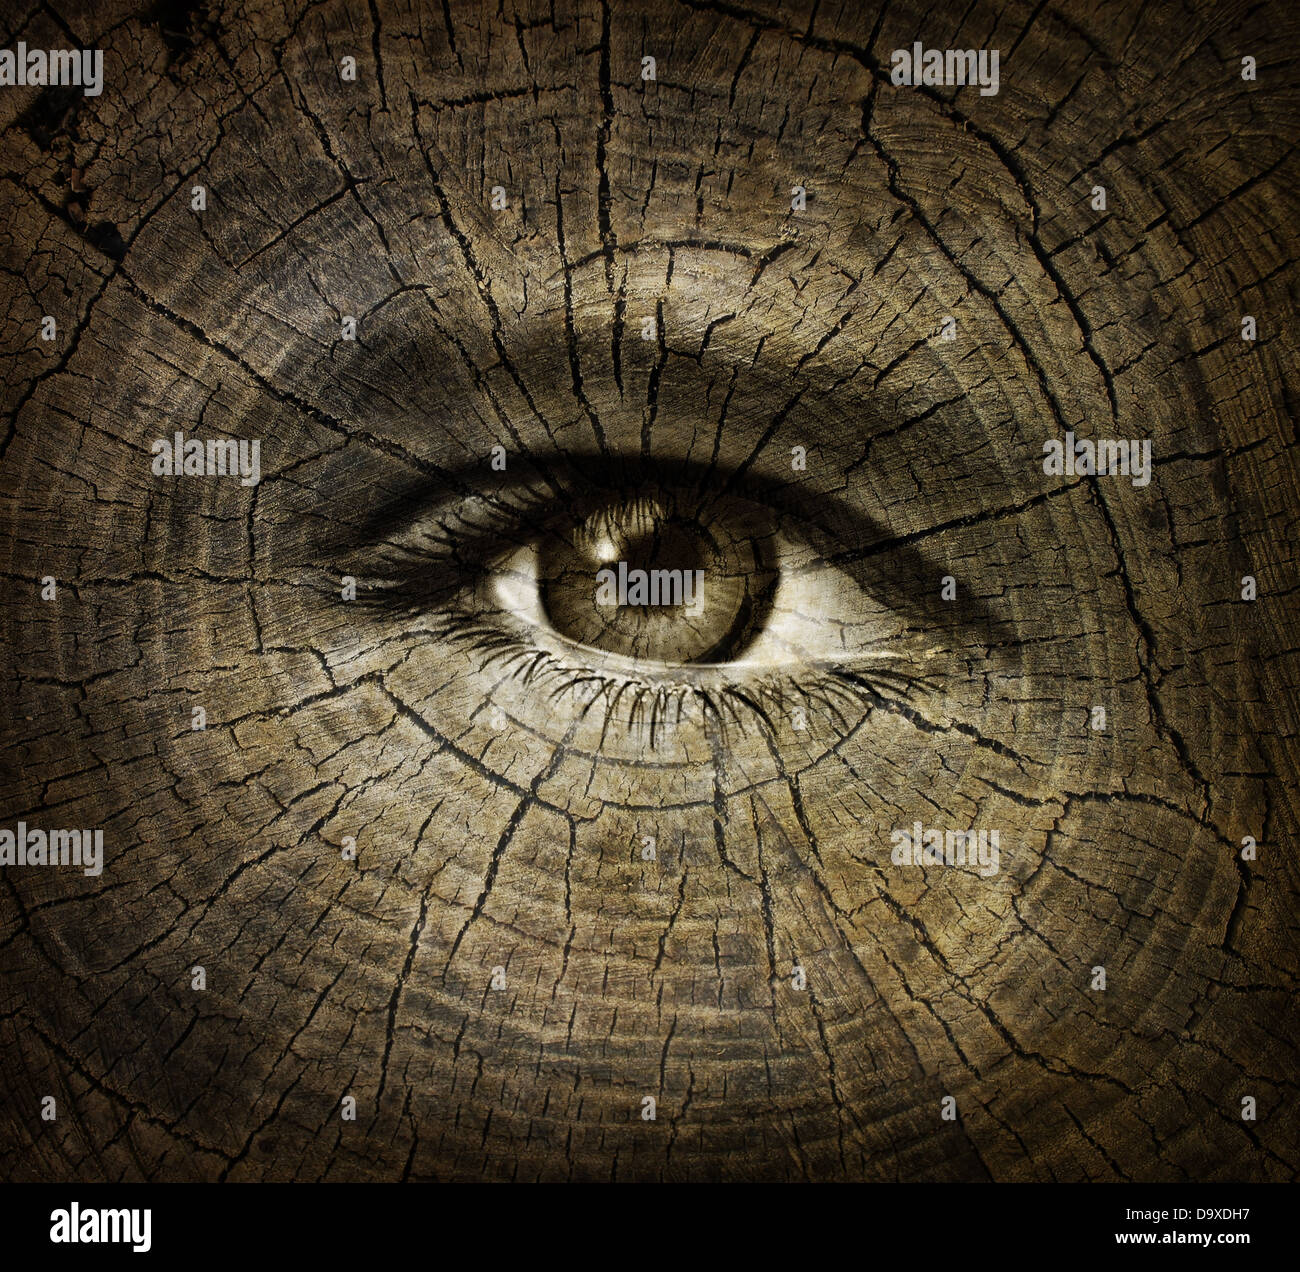 Aging or ageing concept with an open human eye on a wood grain texture of old tree rings as a health care and medical idea of getting older and the changes or decline in function in a person over time. Stock Photo